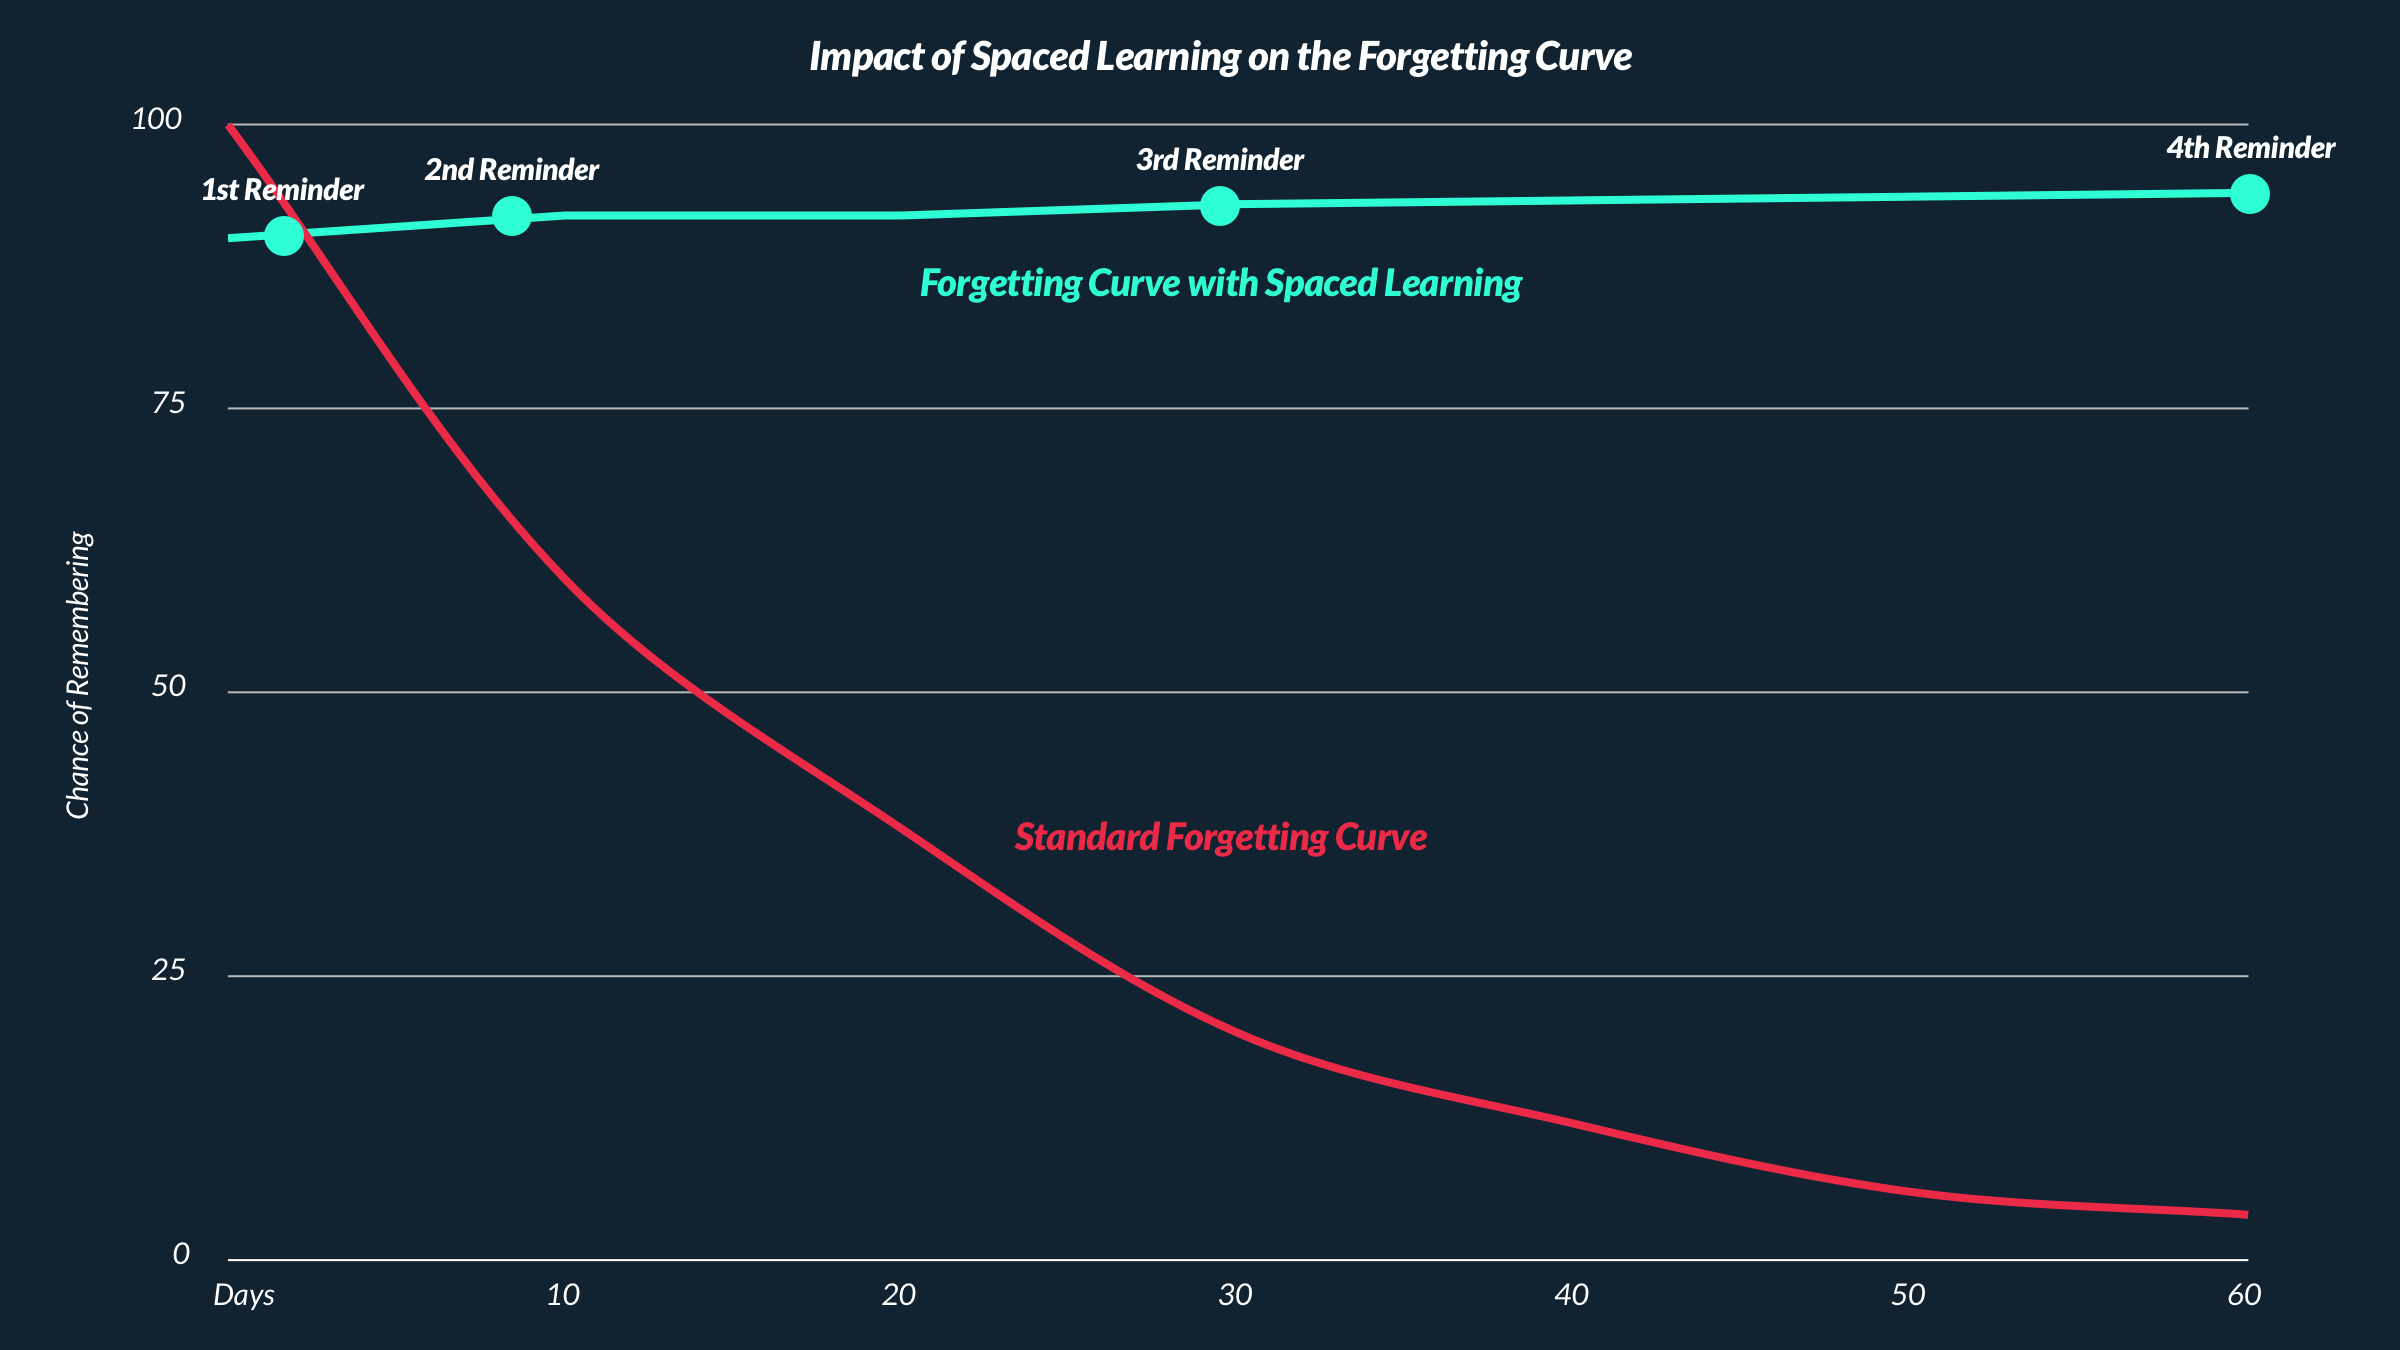 graphing showing effect of spaced learning on the forgetting curve